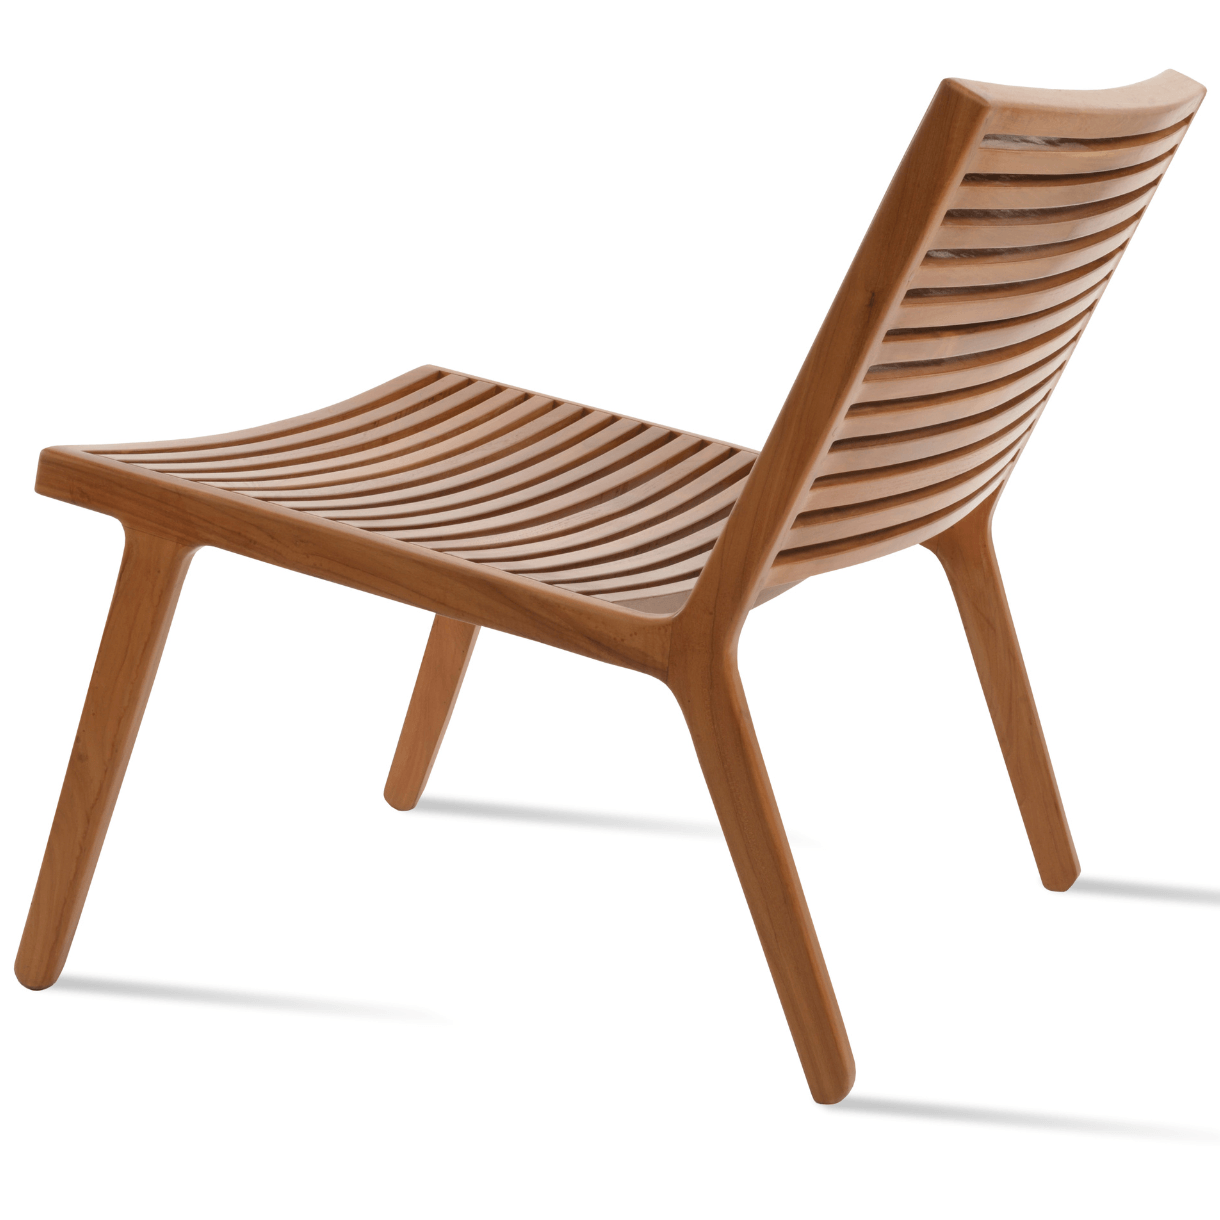 Wooden Lounge Chair Bali Teak Lounger - Your Bar Stools Canada